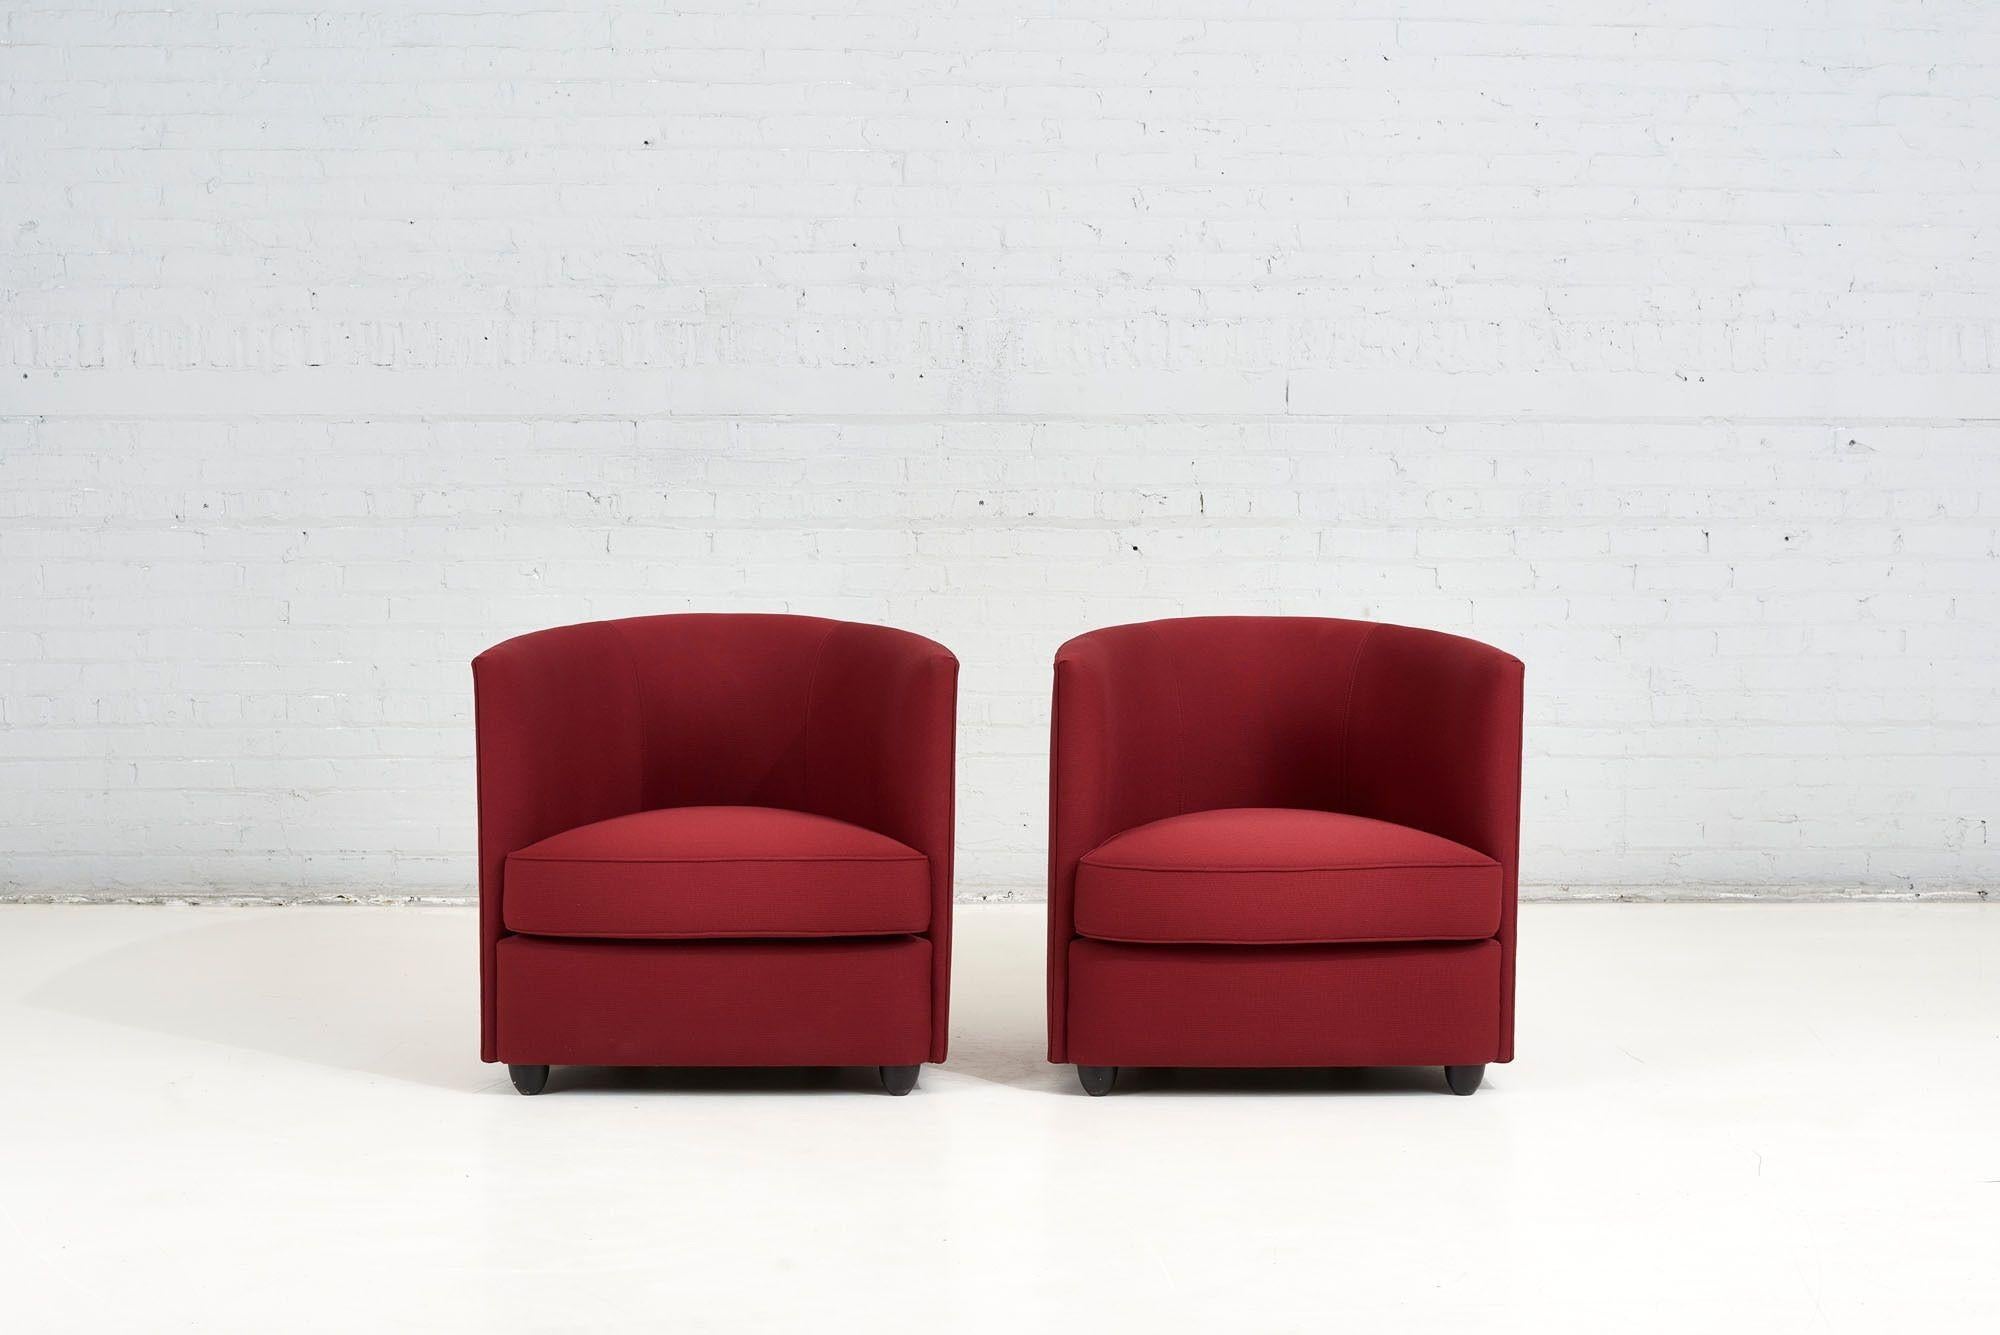 French Andree Putman Pair Crescent Lounge Chair, 1980 For Sale